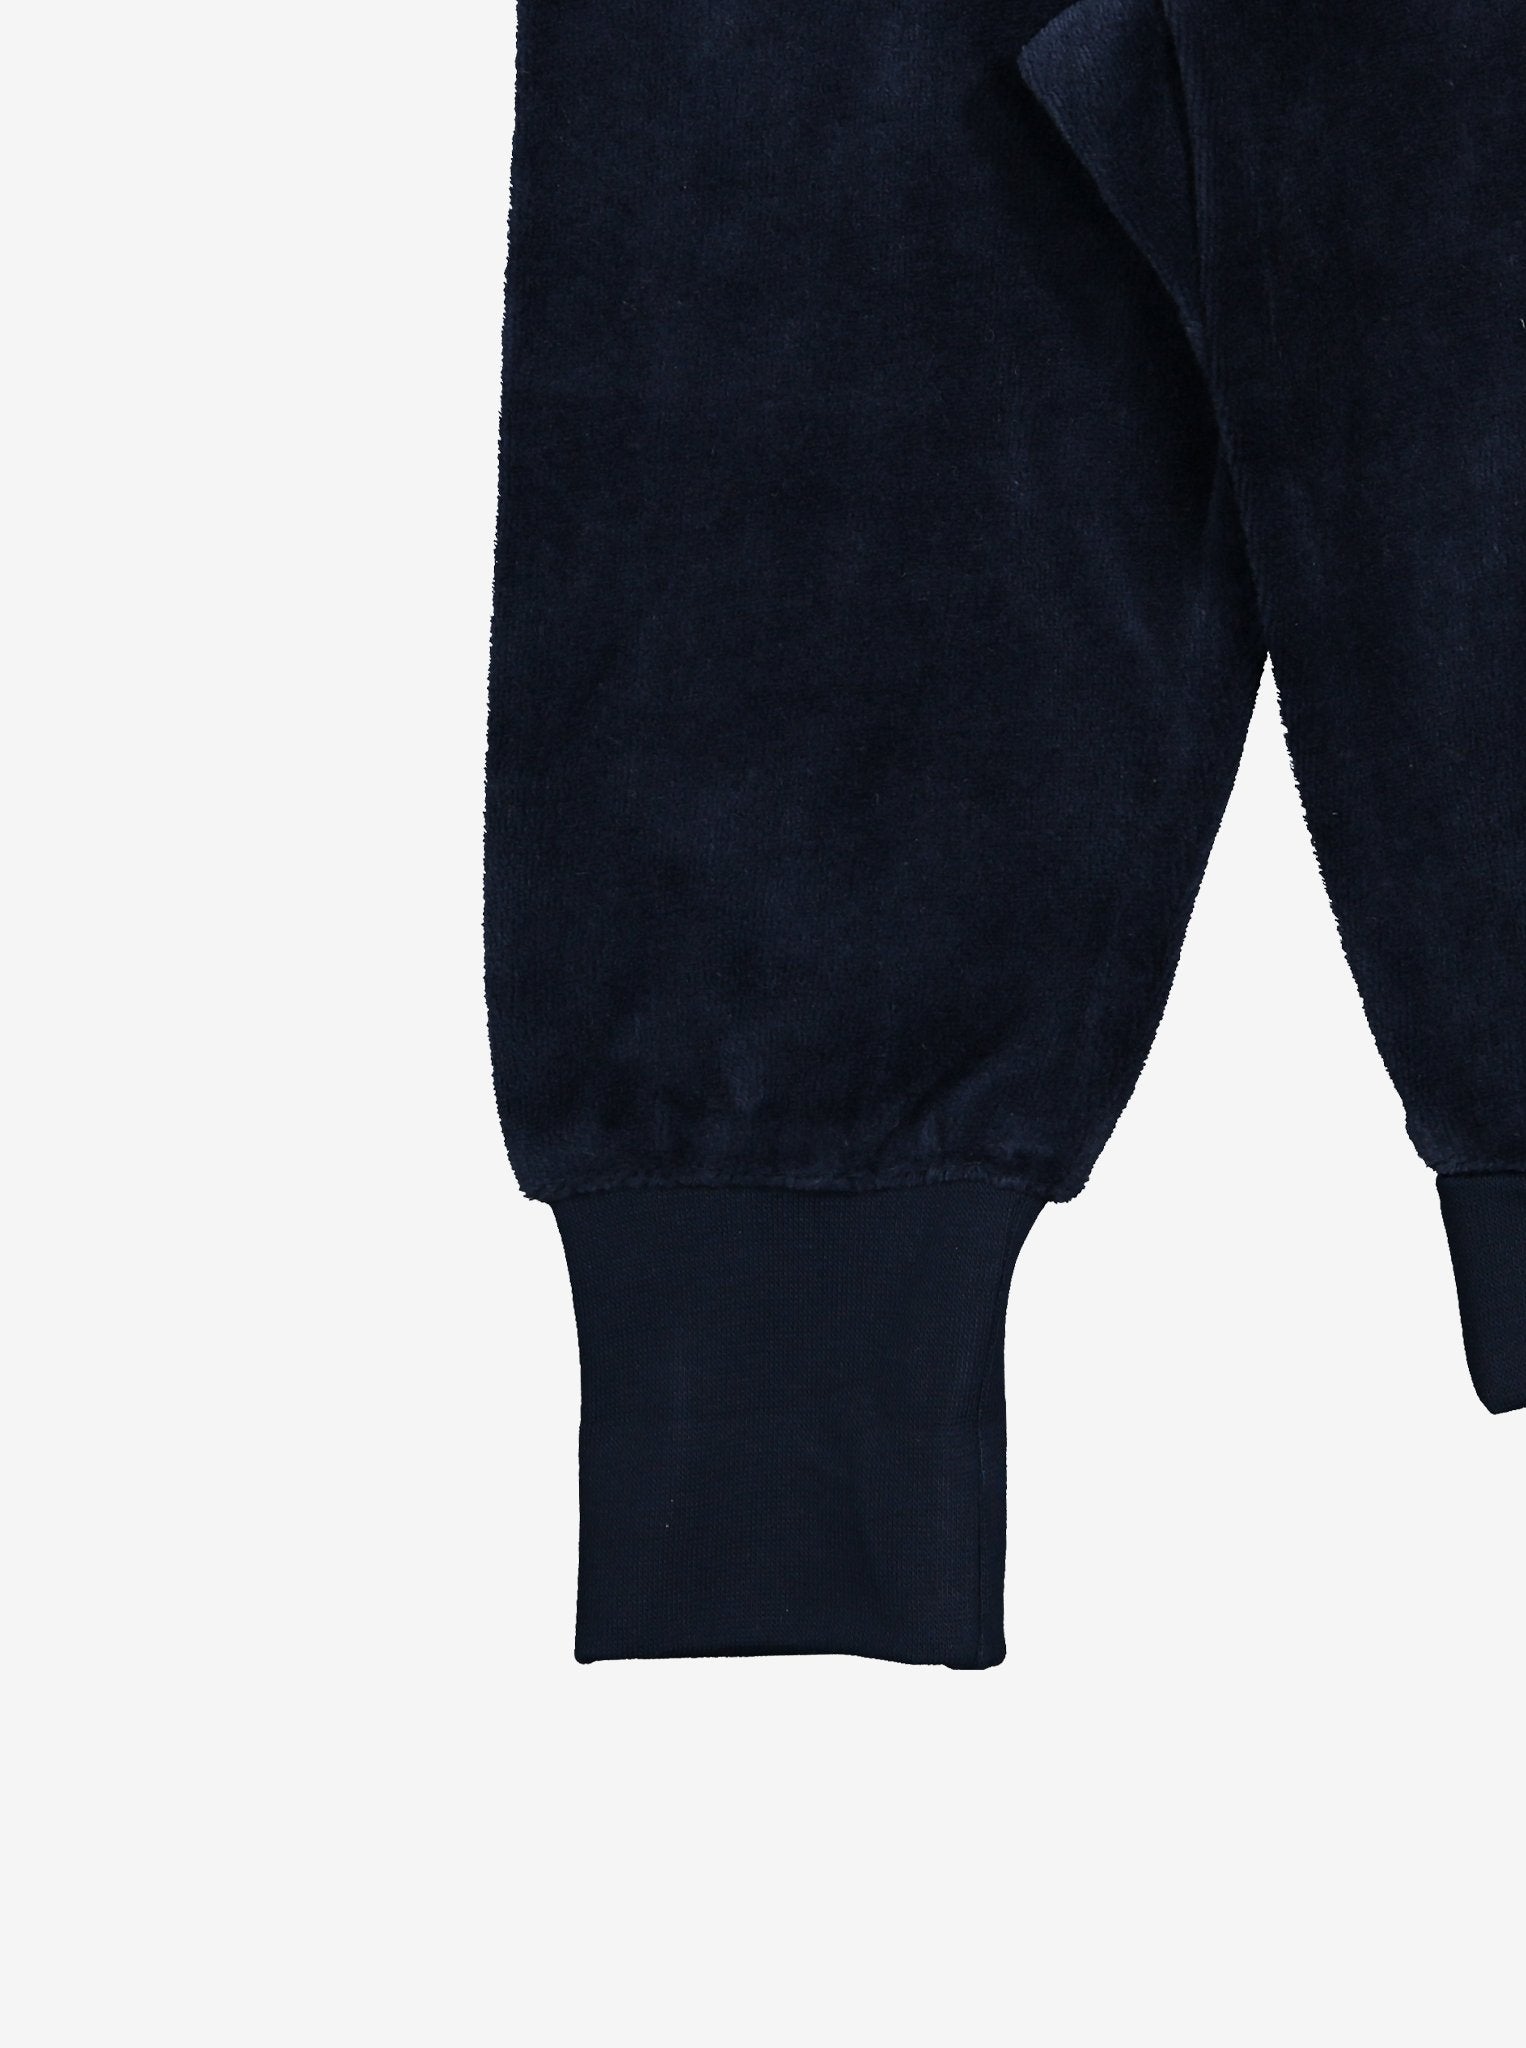 Navy Leggings For Girls, Kids Eco Clothes